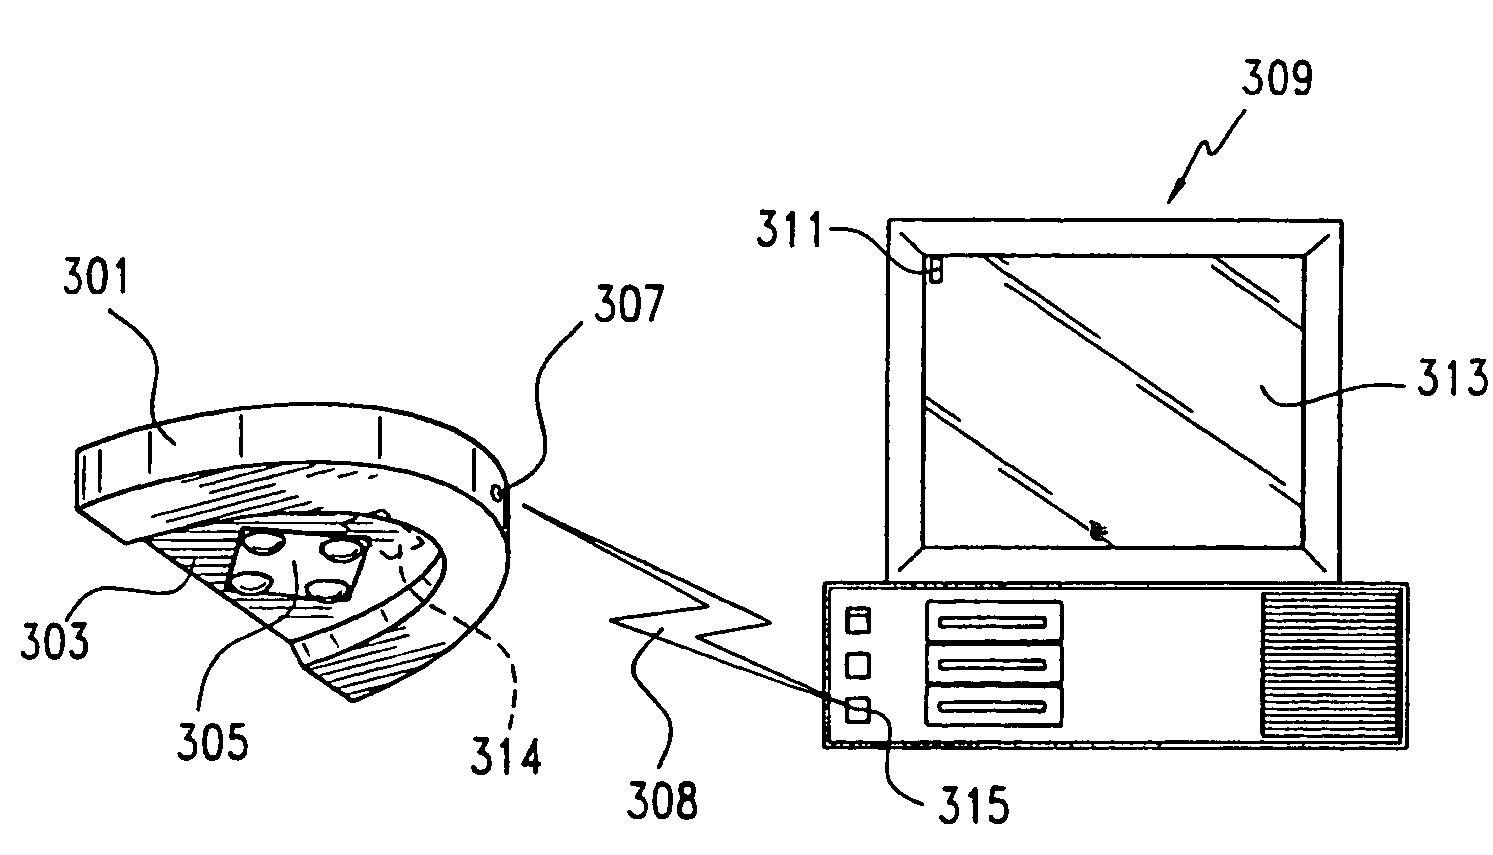 Tongue-operated input device for control of electronic systems